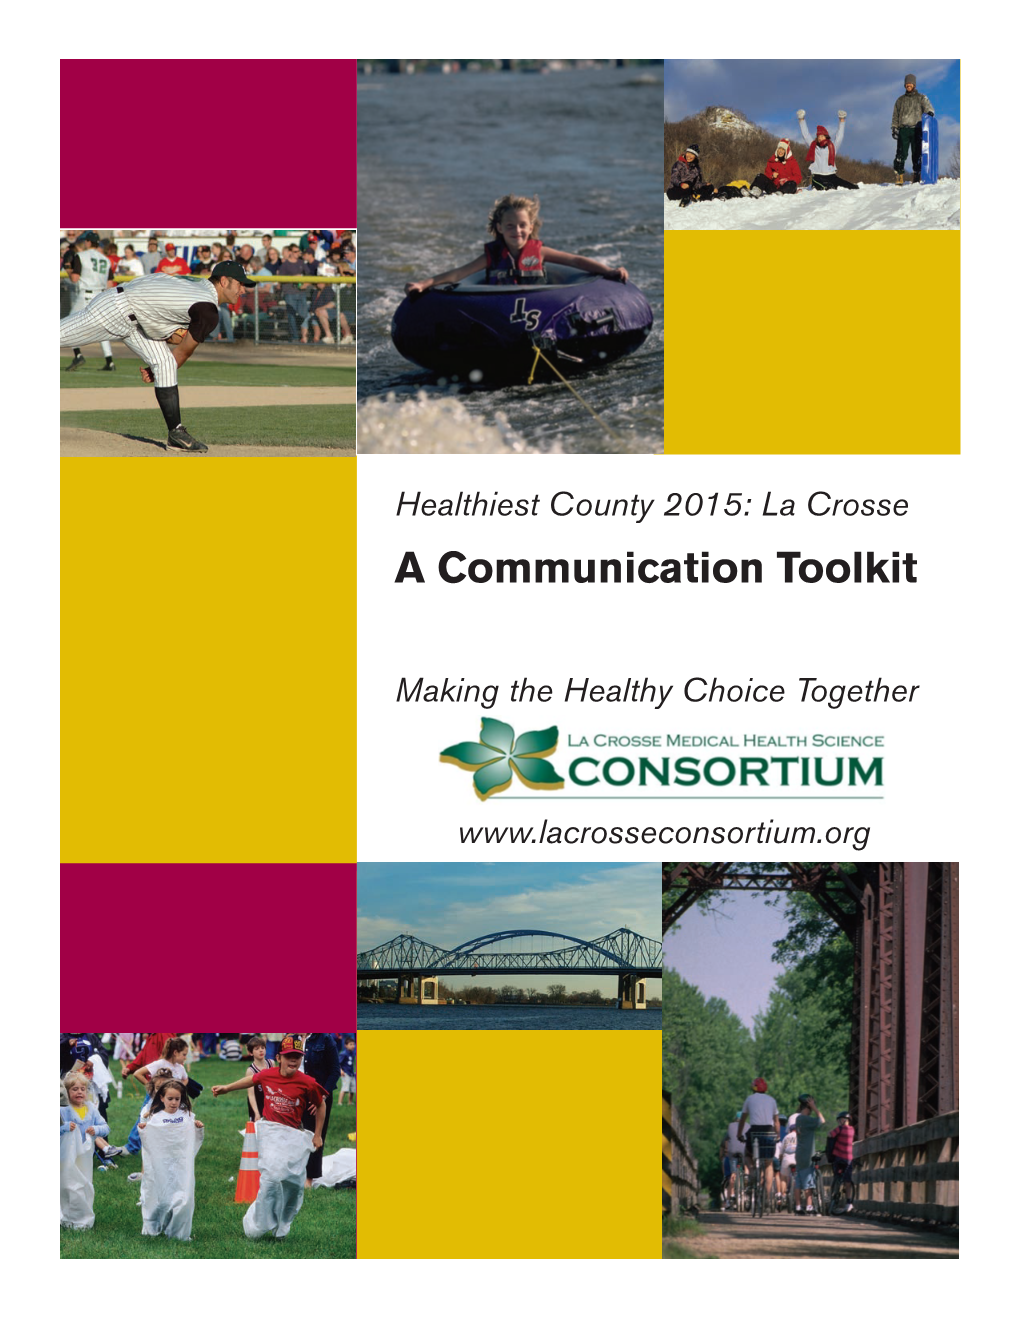 A Communication Toolkit